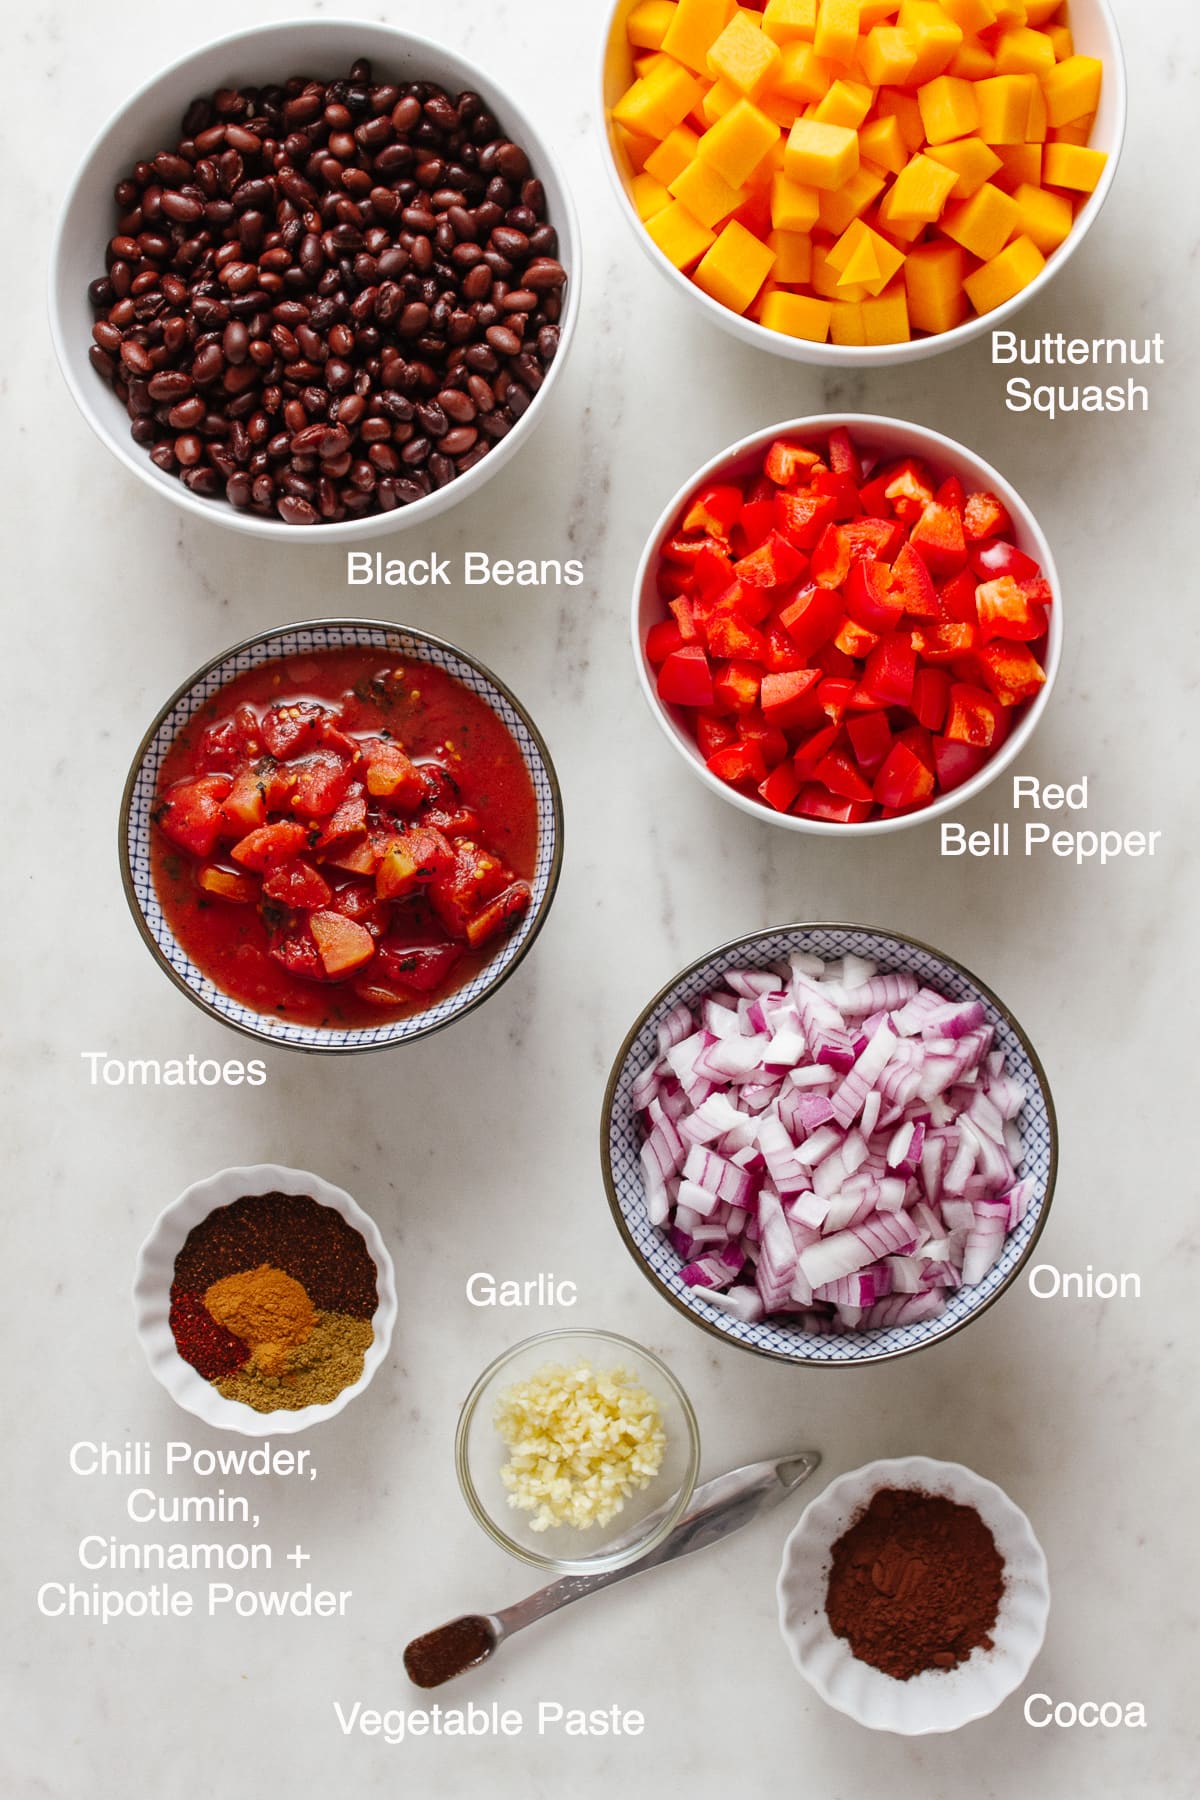 top down view of ingredients needed to make vegan butternut squash chili with black beans.